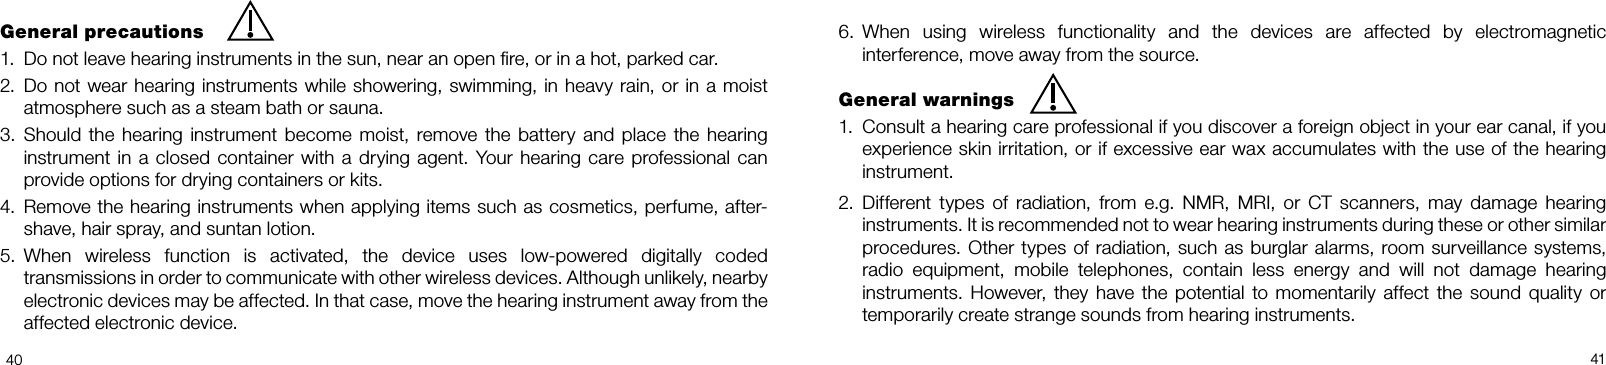   4041General precautions1.  Do not leave hearing instruments in the sun, near an open re, or in a hot, parked car.2.  Do not wear hearing instruments  while showering, swimming, in heavy rain, or in a  moist  atmosphere such as a steam bath or sauna.3.  Should the hearing  instrument become  moist, remove the battery and place  the hearing instrument in a closed container with a drying agent. Your hearing care professional can provide options for drying containers or kits.4.  Remove the hearing instruments when applying items such as cosmetics, perfume, aftershave, hair spray, and suntan lotion. 5.  When  wireless  function  is  activated,  the  device  uses  lowpowered  digitally  coded transmissions in order to communicate with other wireless devices. Although unlikely, nearby electronic devices may be affected. In that case, move the hearing instrument away from the affected electronic device.6.  When  using  wireless  functionality  and  the  devices  are  affected  by  electromagnetic interference, move away from the source.General warnings1.  Consult a hearing care professional if you discover a foreign object in your ear canal, if you experience skin irritation, or if excessive ear wax accumulates with the use of the hearing instrument. 2.  Different  types  of  radiation,  from  e.g.  NMR,  MRI,  or  CT  scanners,  may  damage  hearing instruments. It is recommended not to wear hearing instruments during these or other similar procedures. Other types of radiation, such as burglar alarms, room surveillance systems, radio  equipment,  mobile  telephones,  contain  less  energy  and  will  not  damage  hearing instruments. However, they have the potential  to momentarily affect the sound  quality or temporarily create strange sounds from hearing instruments.